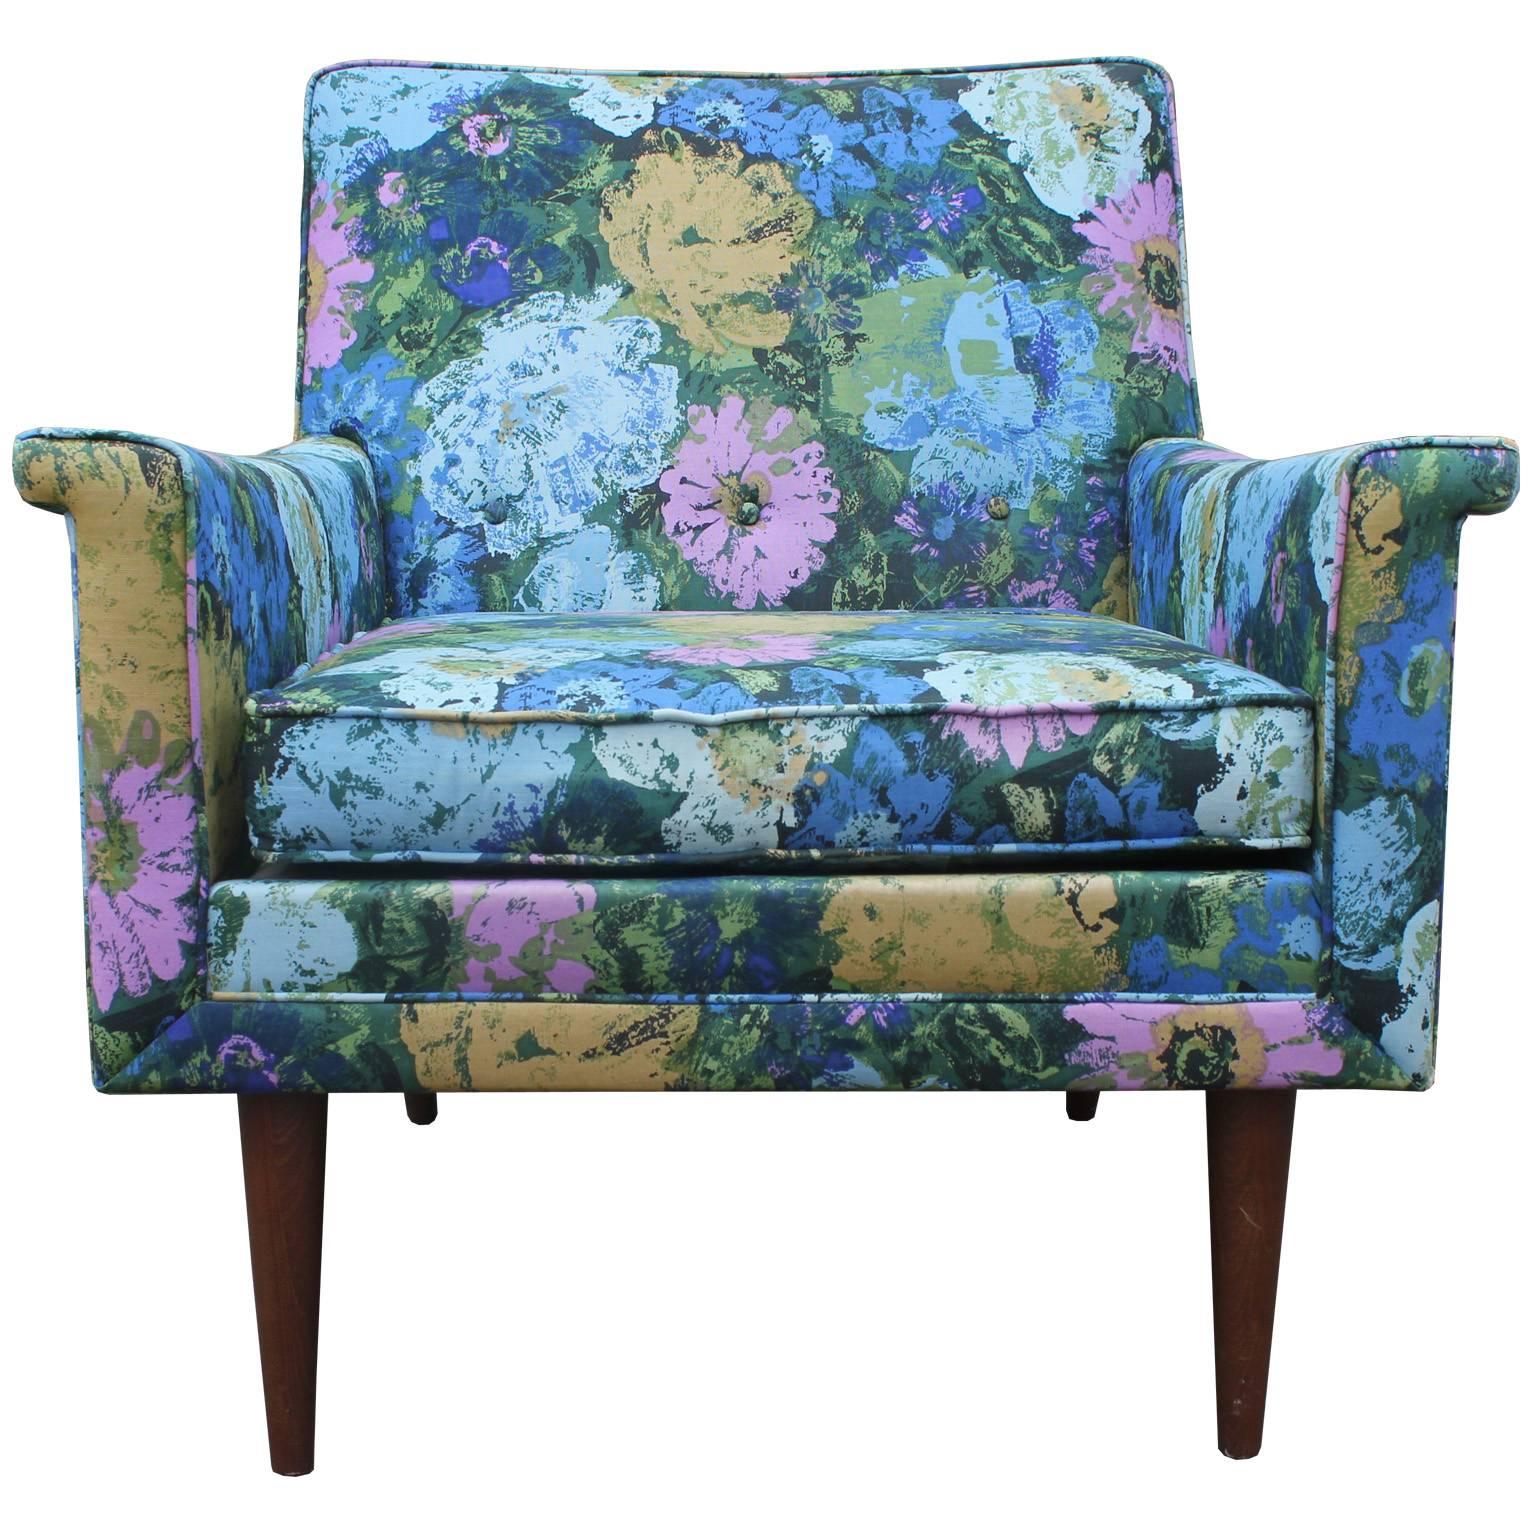 Fabulous lounge chair in original floral fabric. Upholstery is in good vintage condition with very light wear and very usable. Chair has great Mid-Century lines with flared out arm rests. Tapered legs are in a medium walnut. The chair is attributed